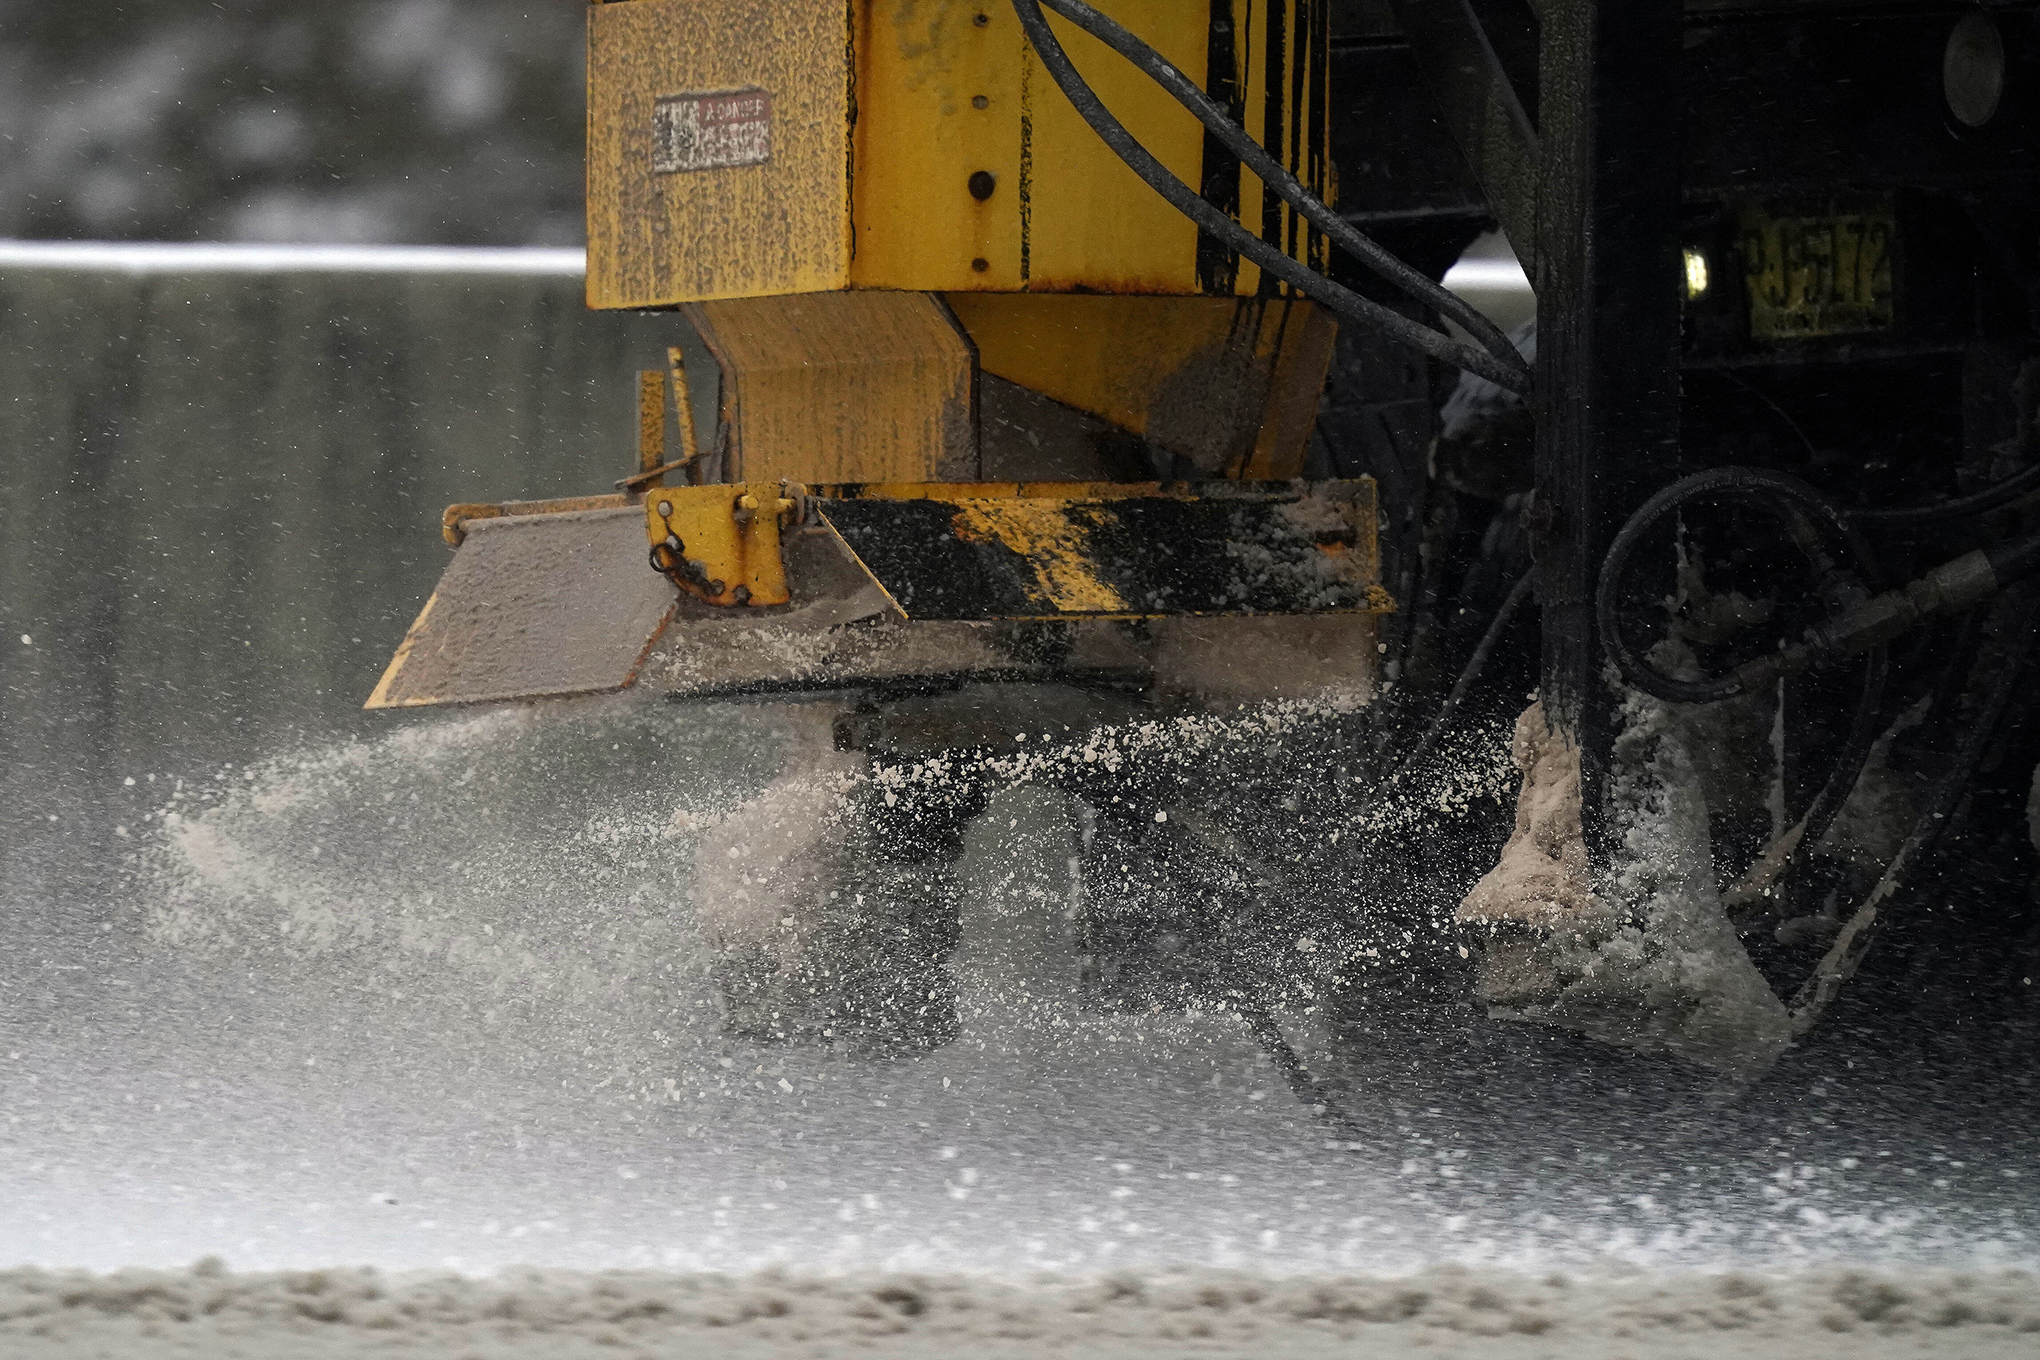 Using road salt has its drawbacks, some community leaders see a solution in brine